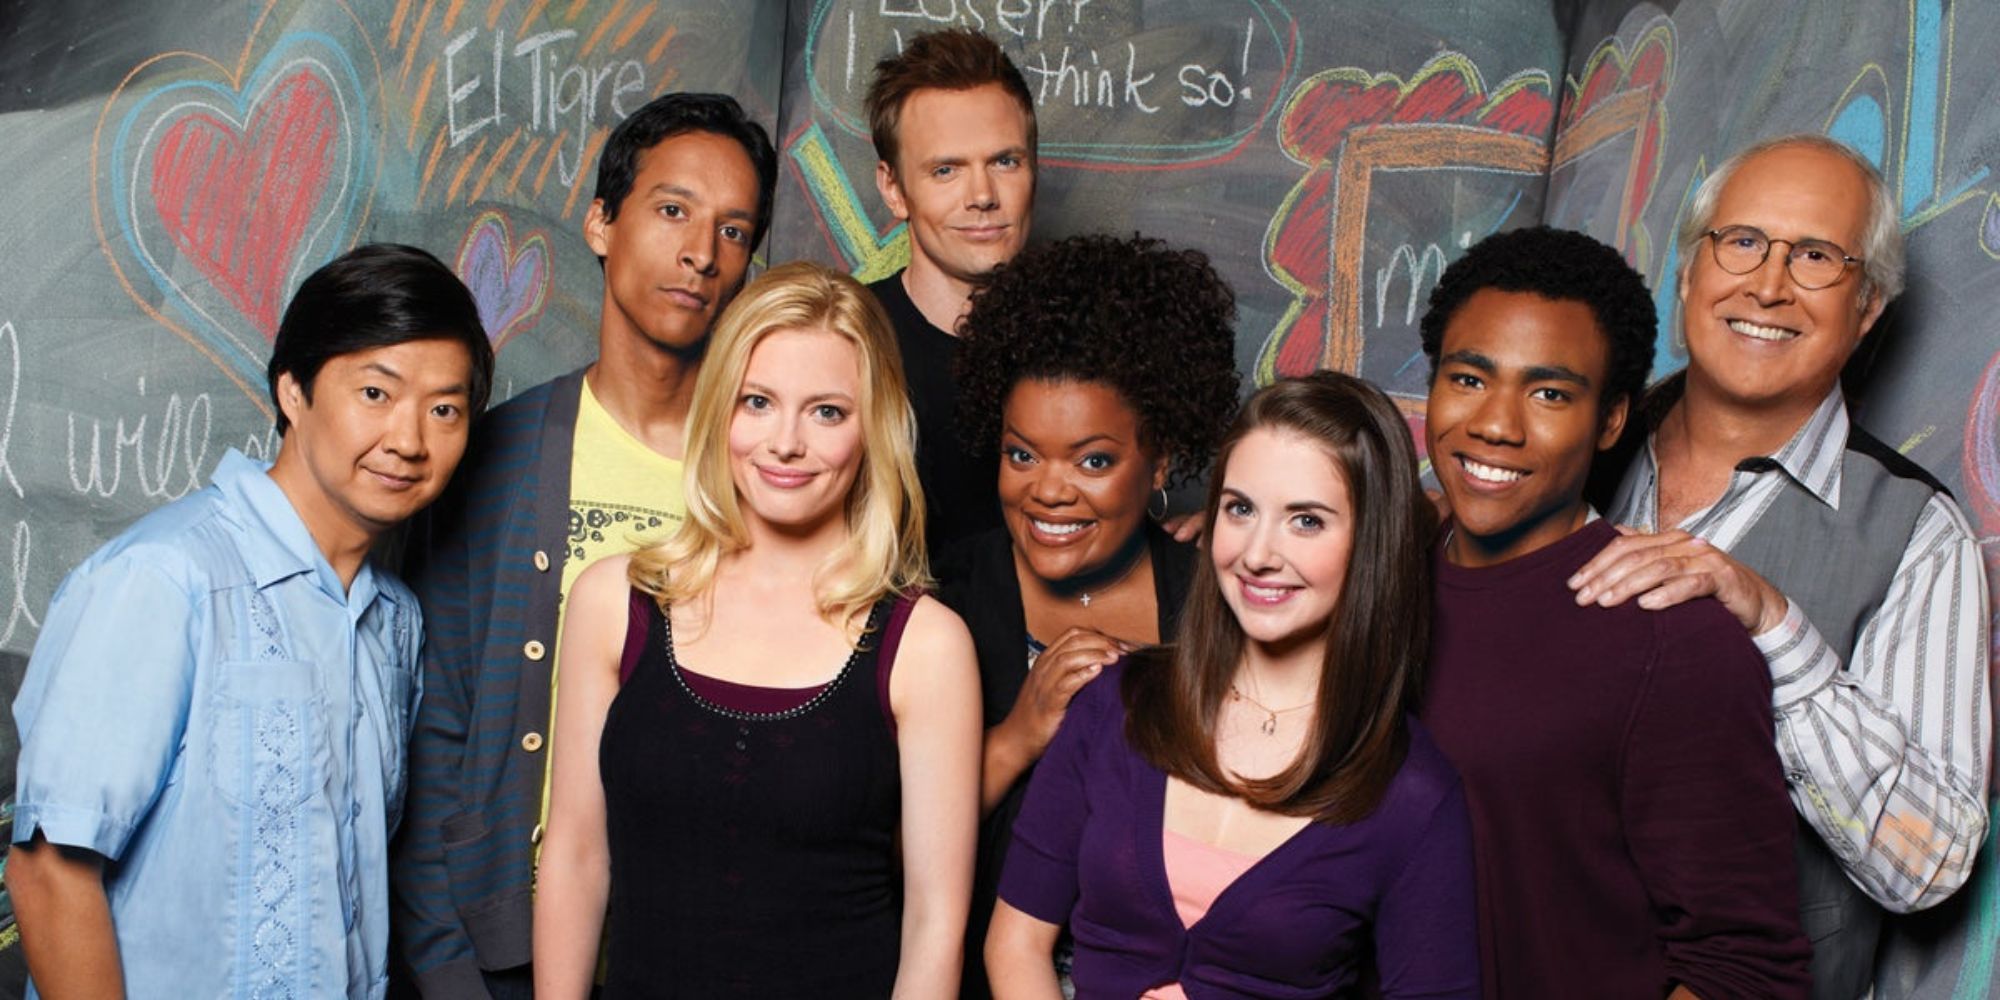 Cast of TV show Community, Ken Jeong, Danny Pudi, Gillian Jacobs, Joel McHale, Yvette Nicole Brown, Alison Brie, Donald Glover, Chevy Chase